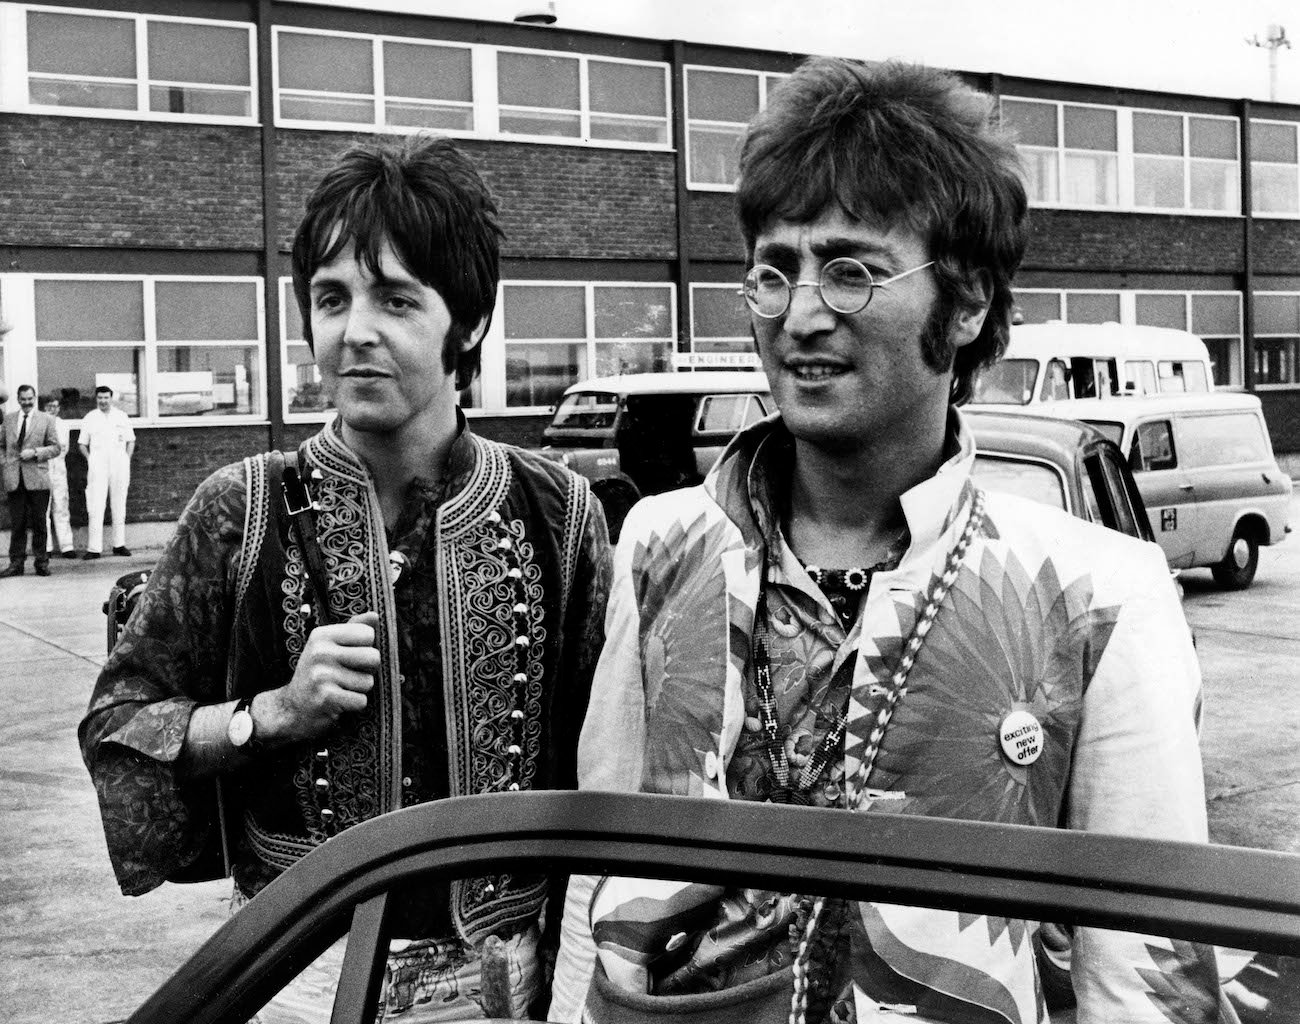 Paul McCartney and John Lennon at Heathrow Airport after a holiday in Greece, 1967.